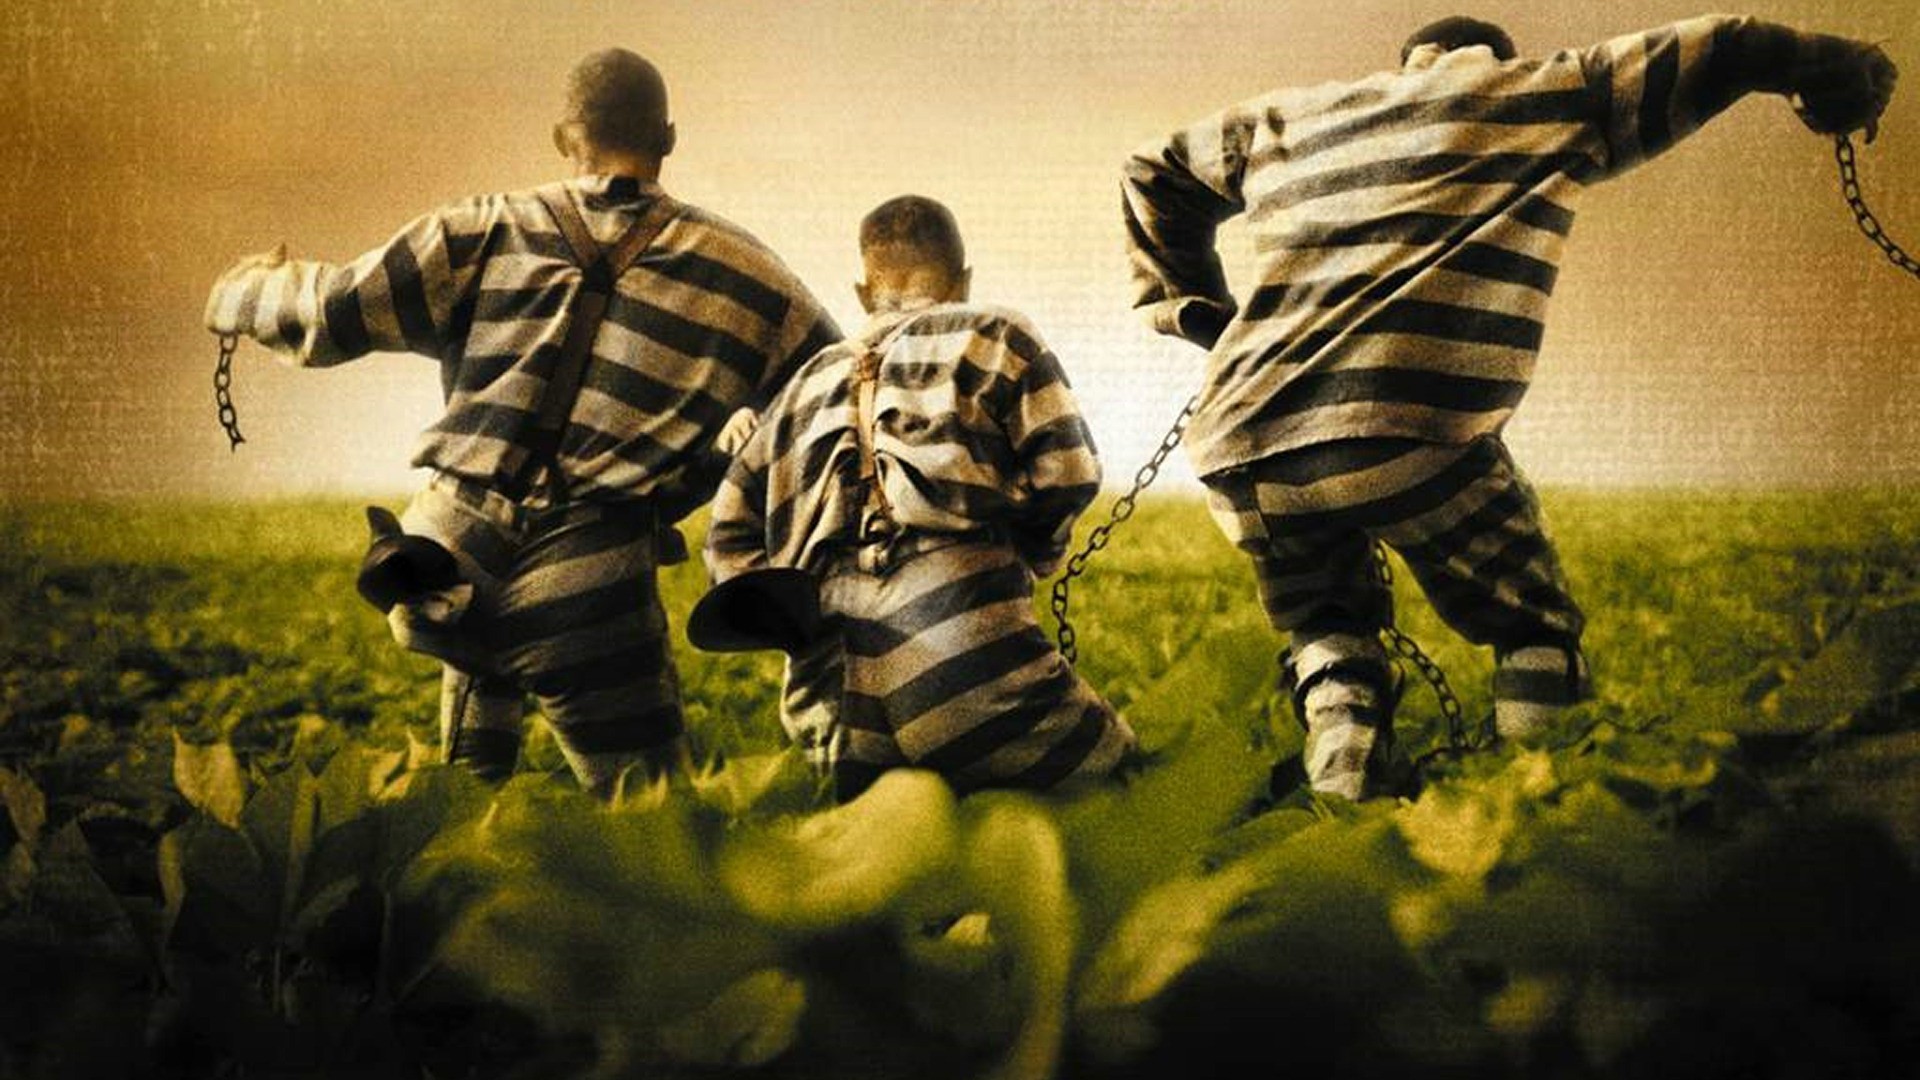 General 1920x1080 prisoners movies O Brother, Where Art Thou? 2000 (Year) humor